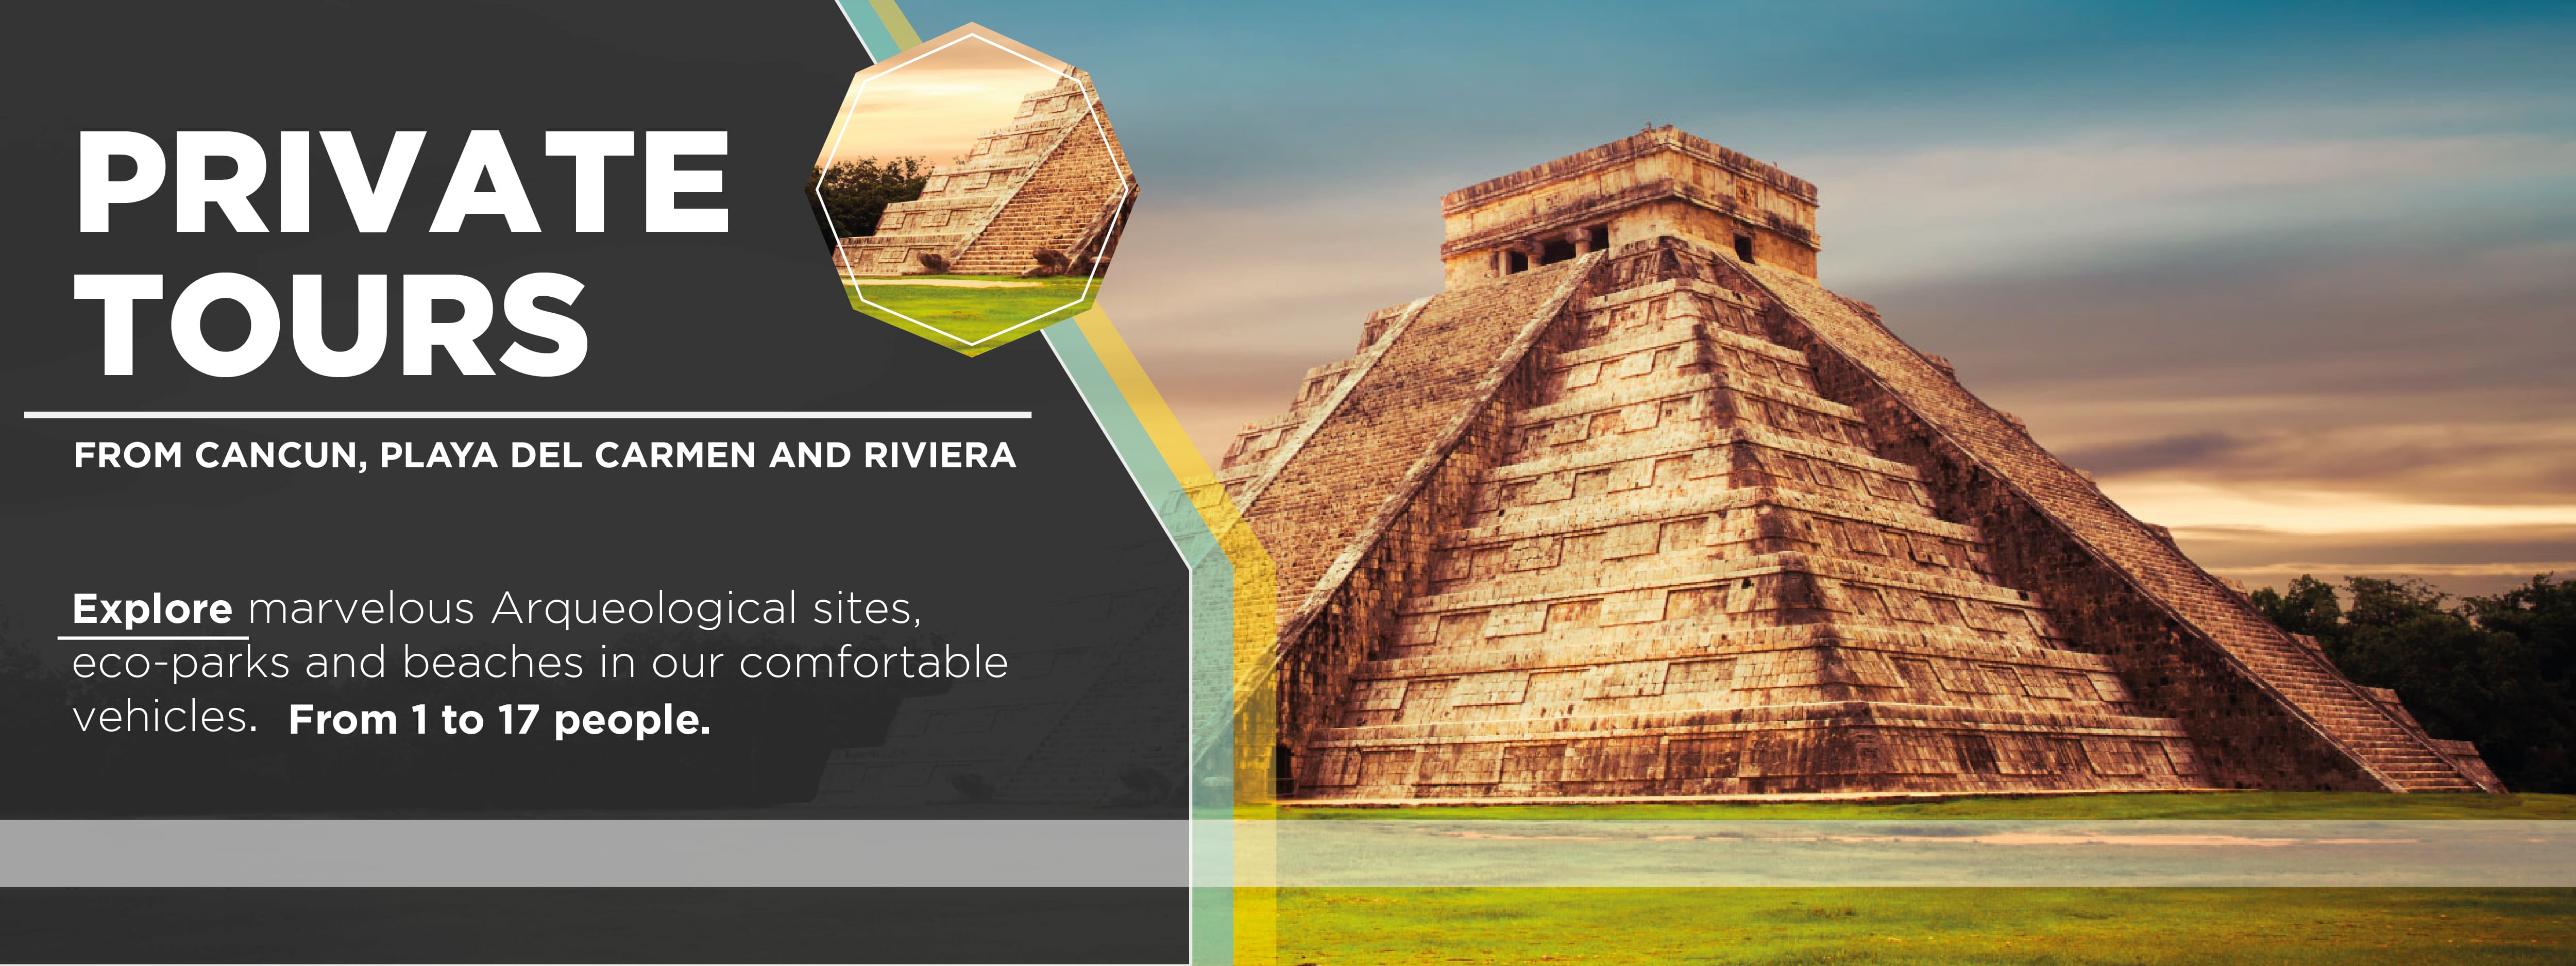 PRIVATE TOURS FROM CANCUN, PLAYA DEL CARMEN AND RIVIERA MAYA